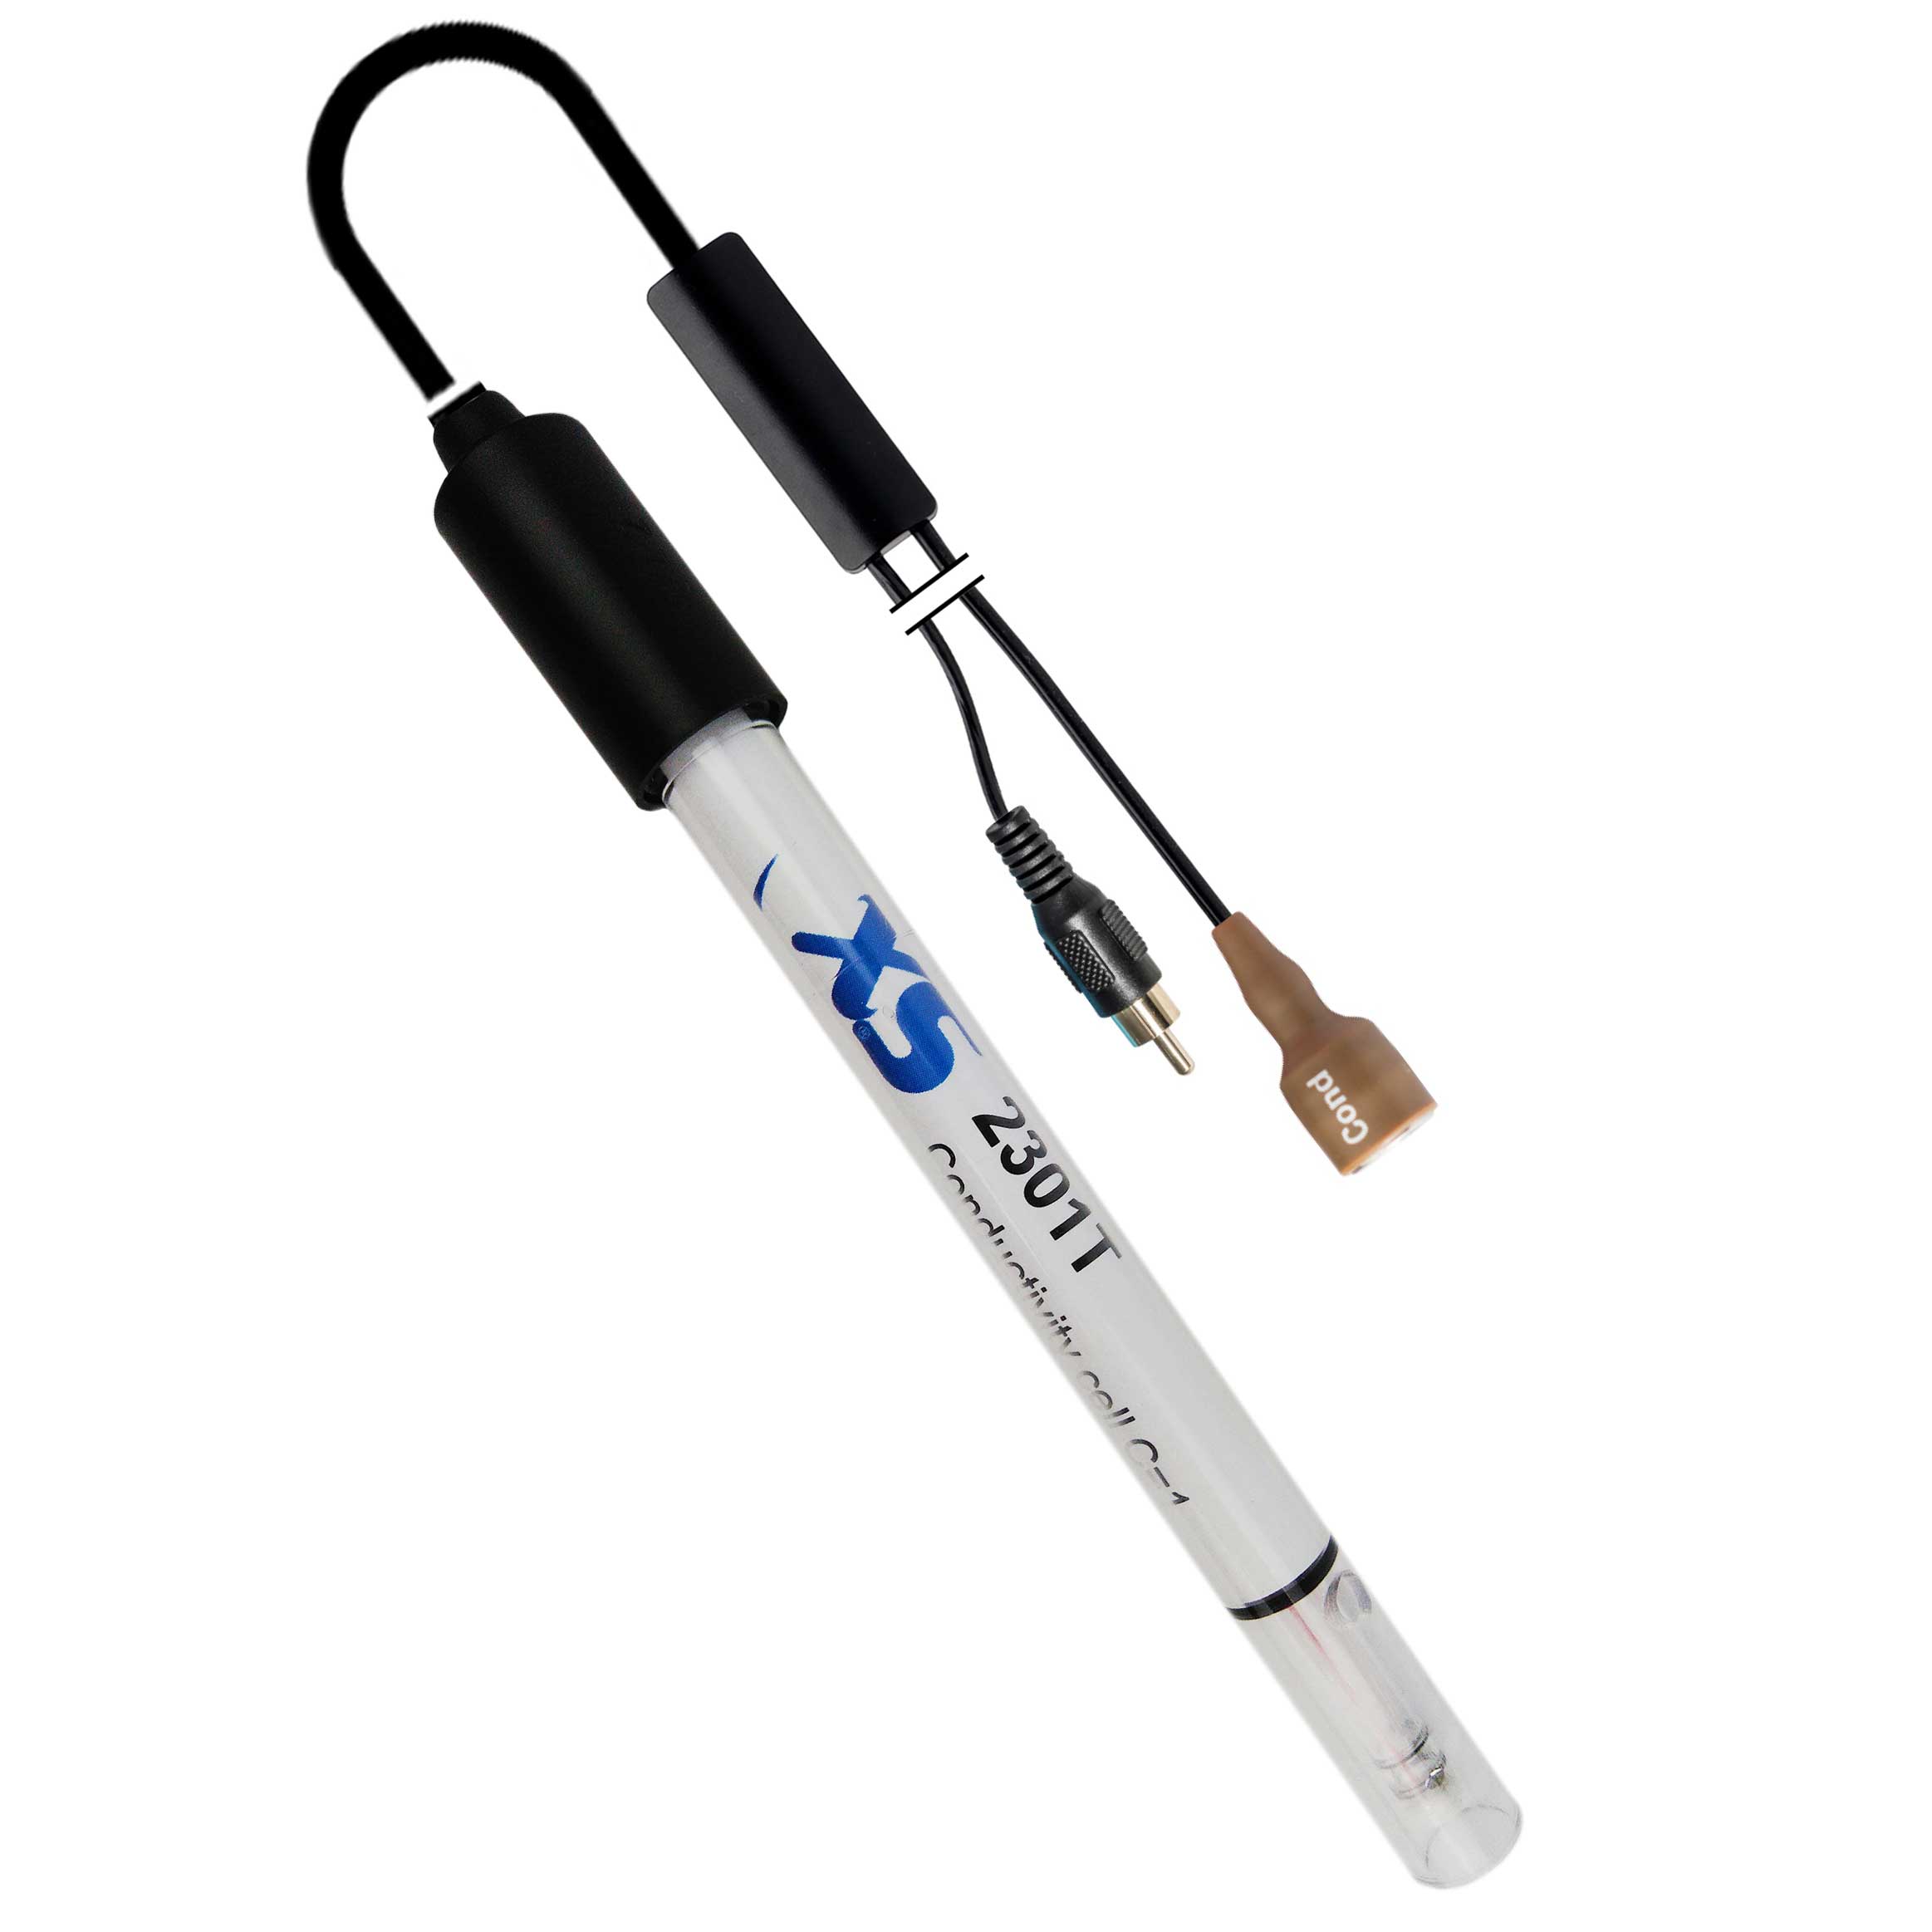 2301TN conductivity cell, plastic body with integrated temperature sensor NTC30K, 2-pole, K = 1 (10 µS to 100 mS), 0 to 80ºC. BNC / Cinch connector, 1 m cable. For general use